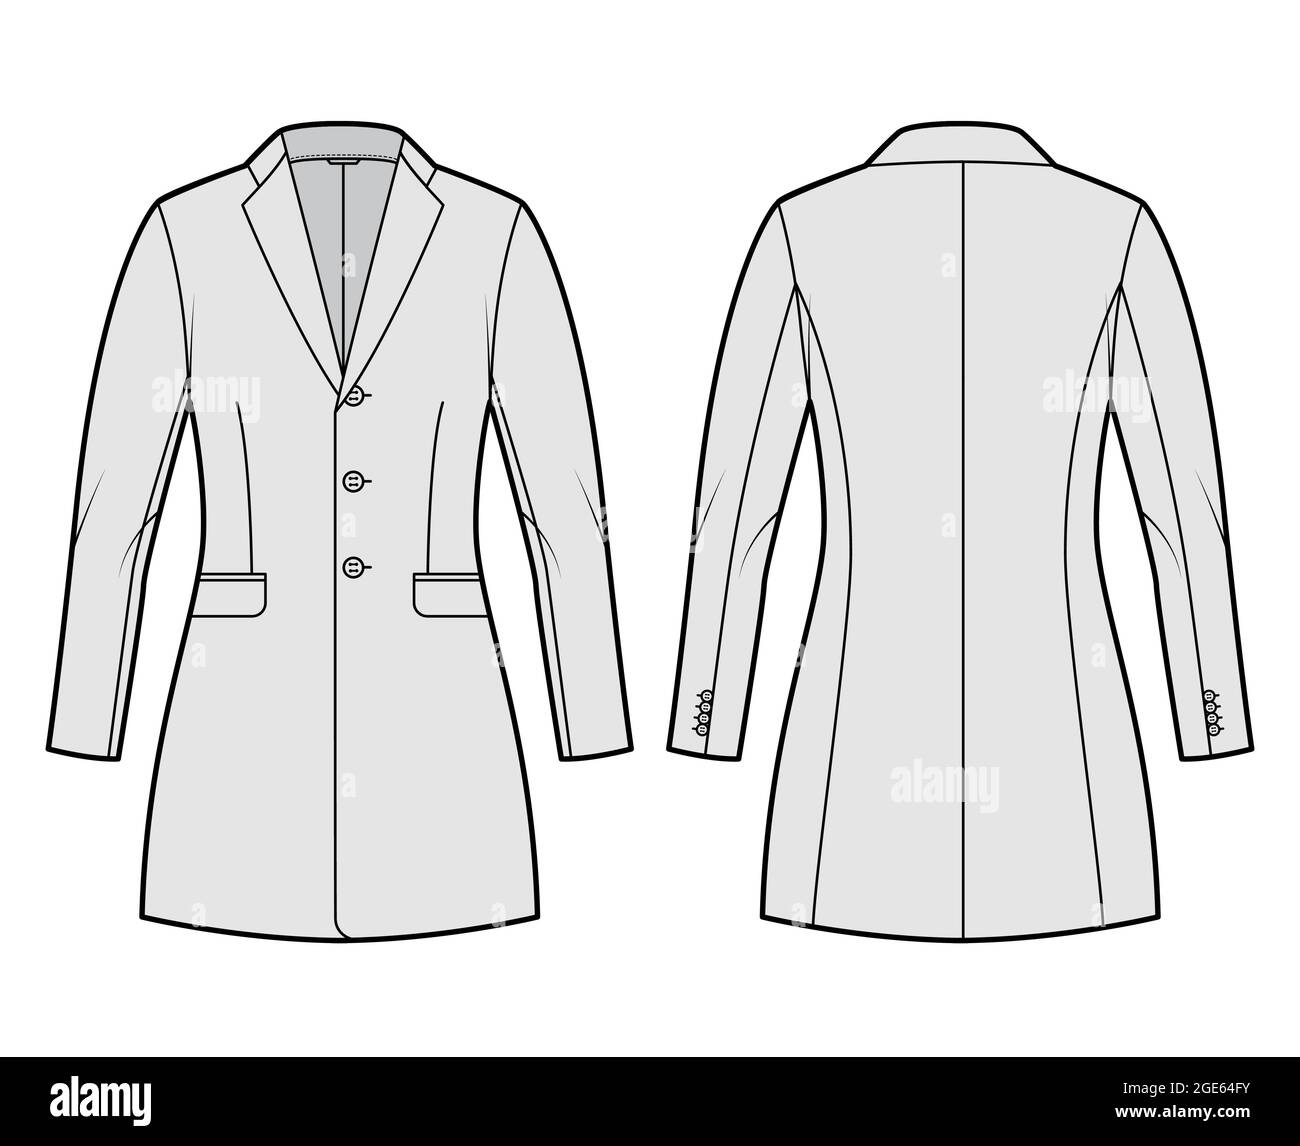 Jacket fitted Blazer structured suit technical fashion illustration with single breasted, long sleeves, flap pockets, fingertip length. Flat coat template front, back, grey color. Women, men CAD Stock Vector